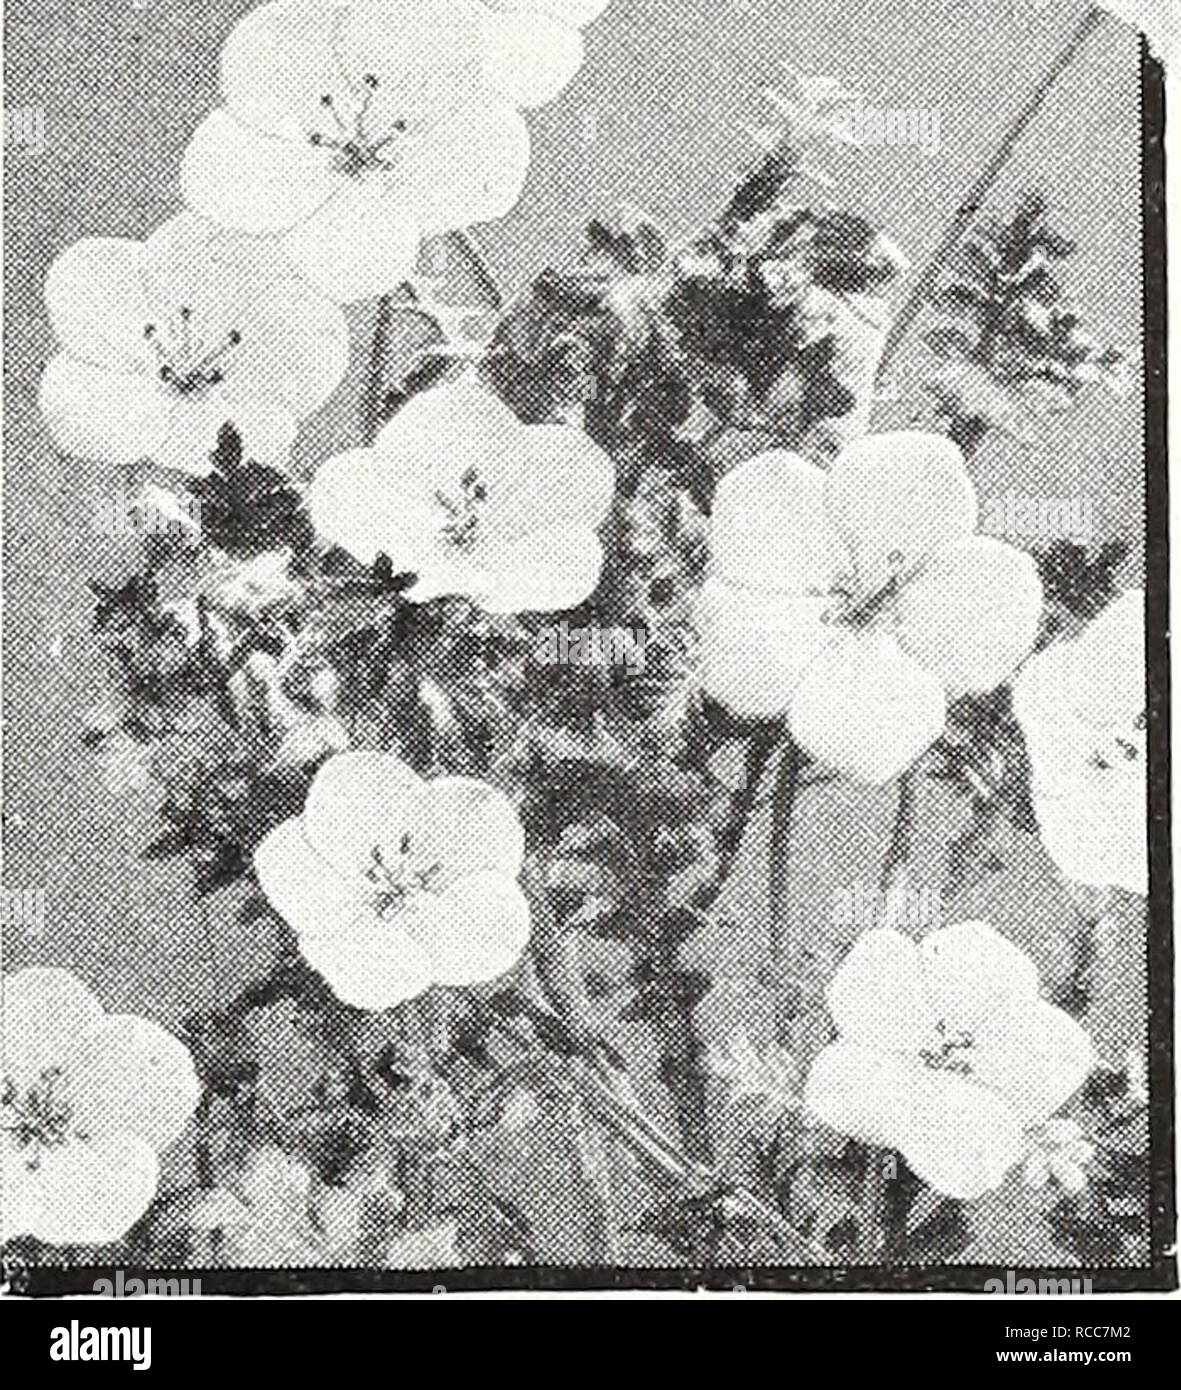 . Dreer's 1950. Seeds Catalogs; Nursery stock Catalogs; Gardening Equipment and supplies Catalogs; Flowers Seeds Catalogs; Vegetables Seeds Catalogs; Fruit Seeds Catalogs. J^IA Nasturtium —Double Gleam Hybrids Nierembergia—Bfue Cups Coerulea, 3159. (Hippomanica.) Charming 8-inch annual covered with cup-shaped lavender-blue flowers from mid- summer until frost. Splendid for dwarf MMMMmM beds, borders and rock gardens. Pkt. 20(/'. Purple Robe, 3161. Deep violet blooms on compact, free-flowering plants, 6 inches tall. Pkt. 25^. NEMOPHILA, Insignis Blue, 3143. (Baby Blue Eyes.) A charming annual w Stock Photo